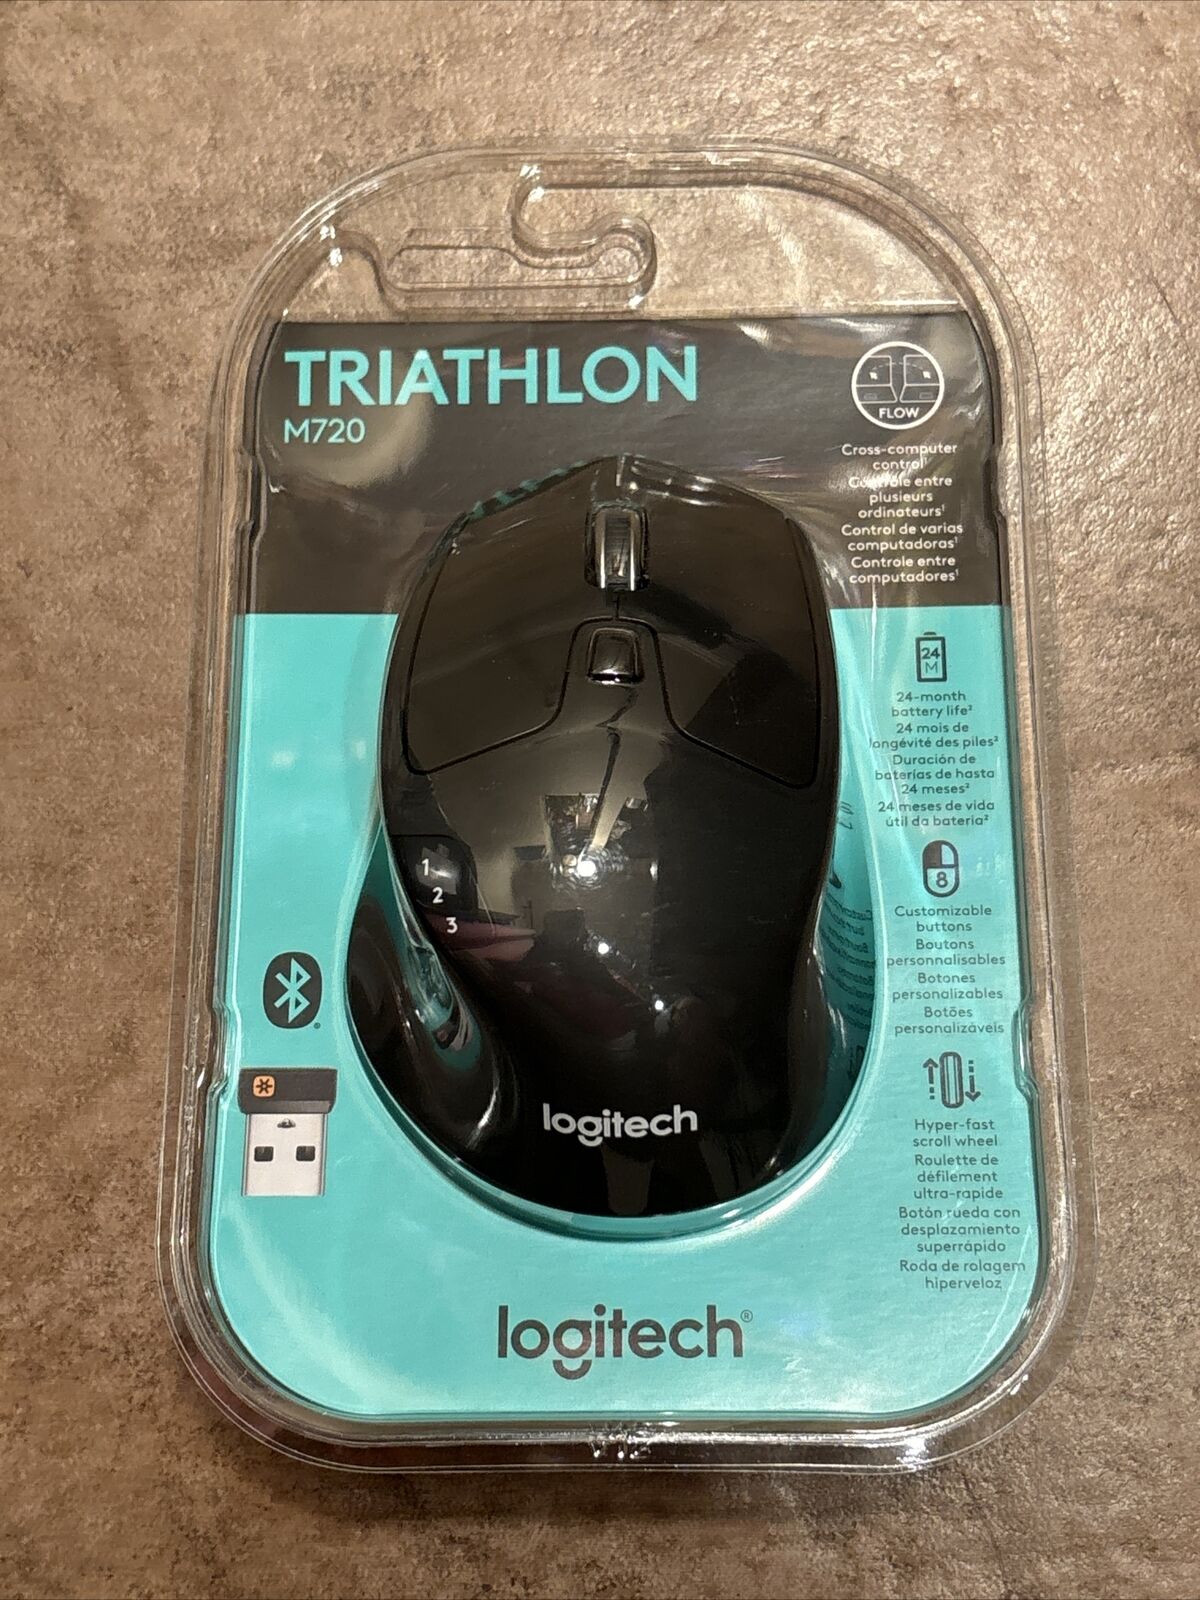 LOGITECH M720 TRIATHLON MULTI-DEVICE WIRELESS MOUSE Brand new and unopened